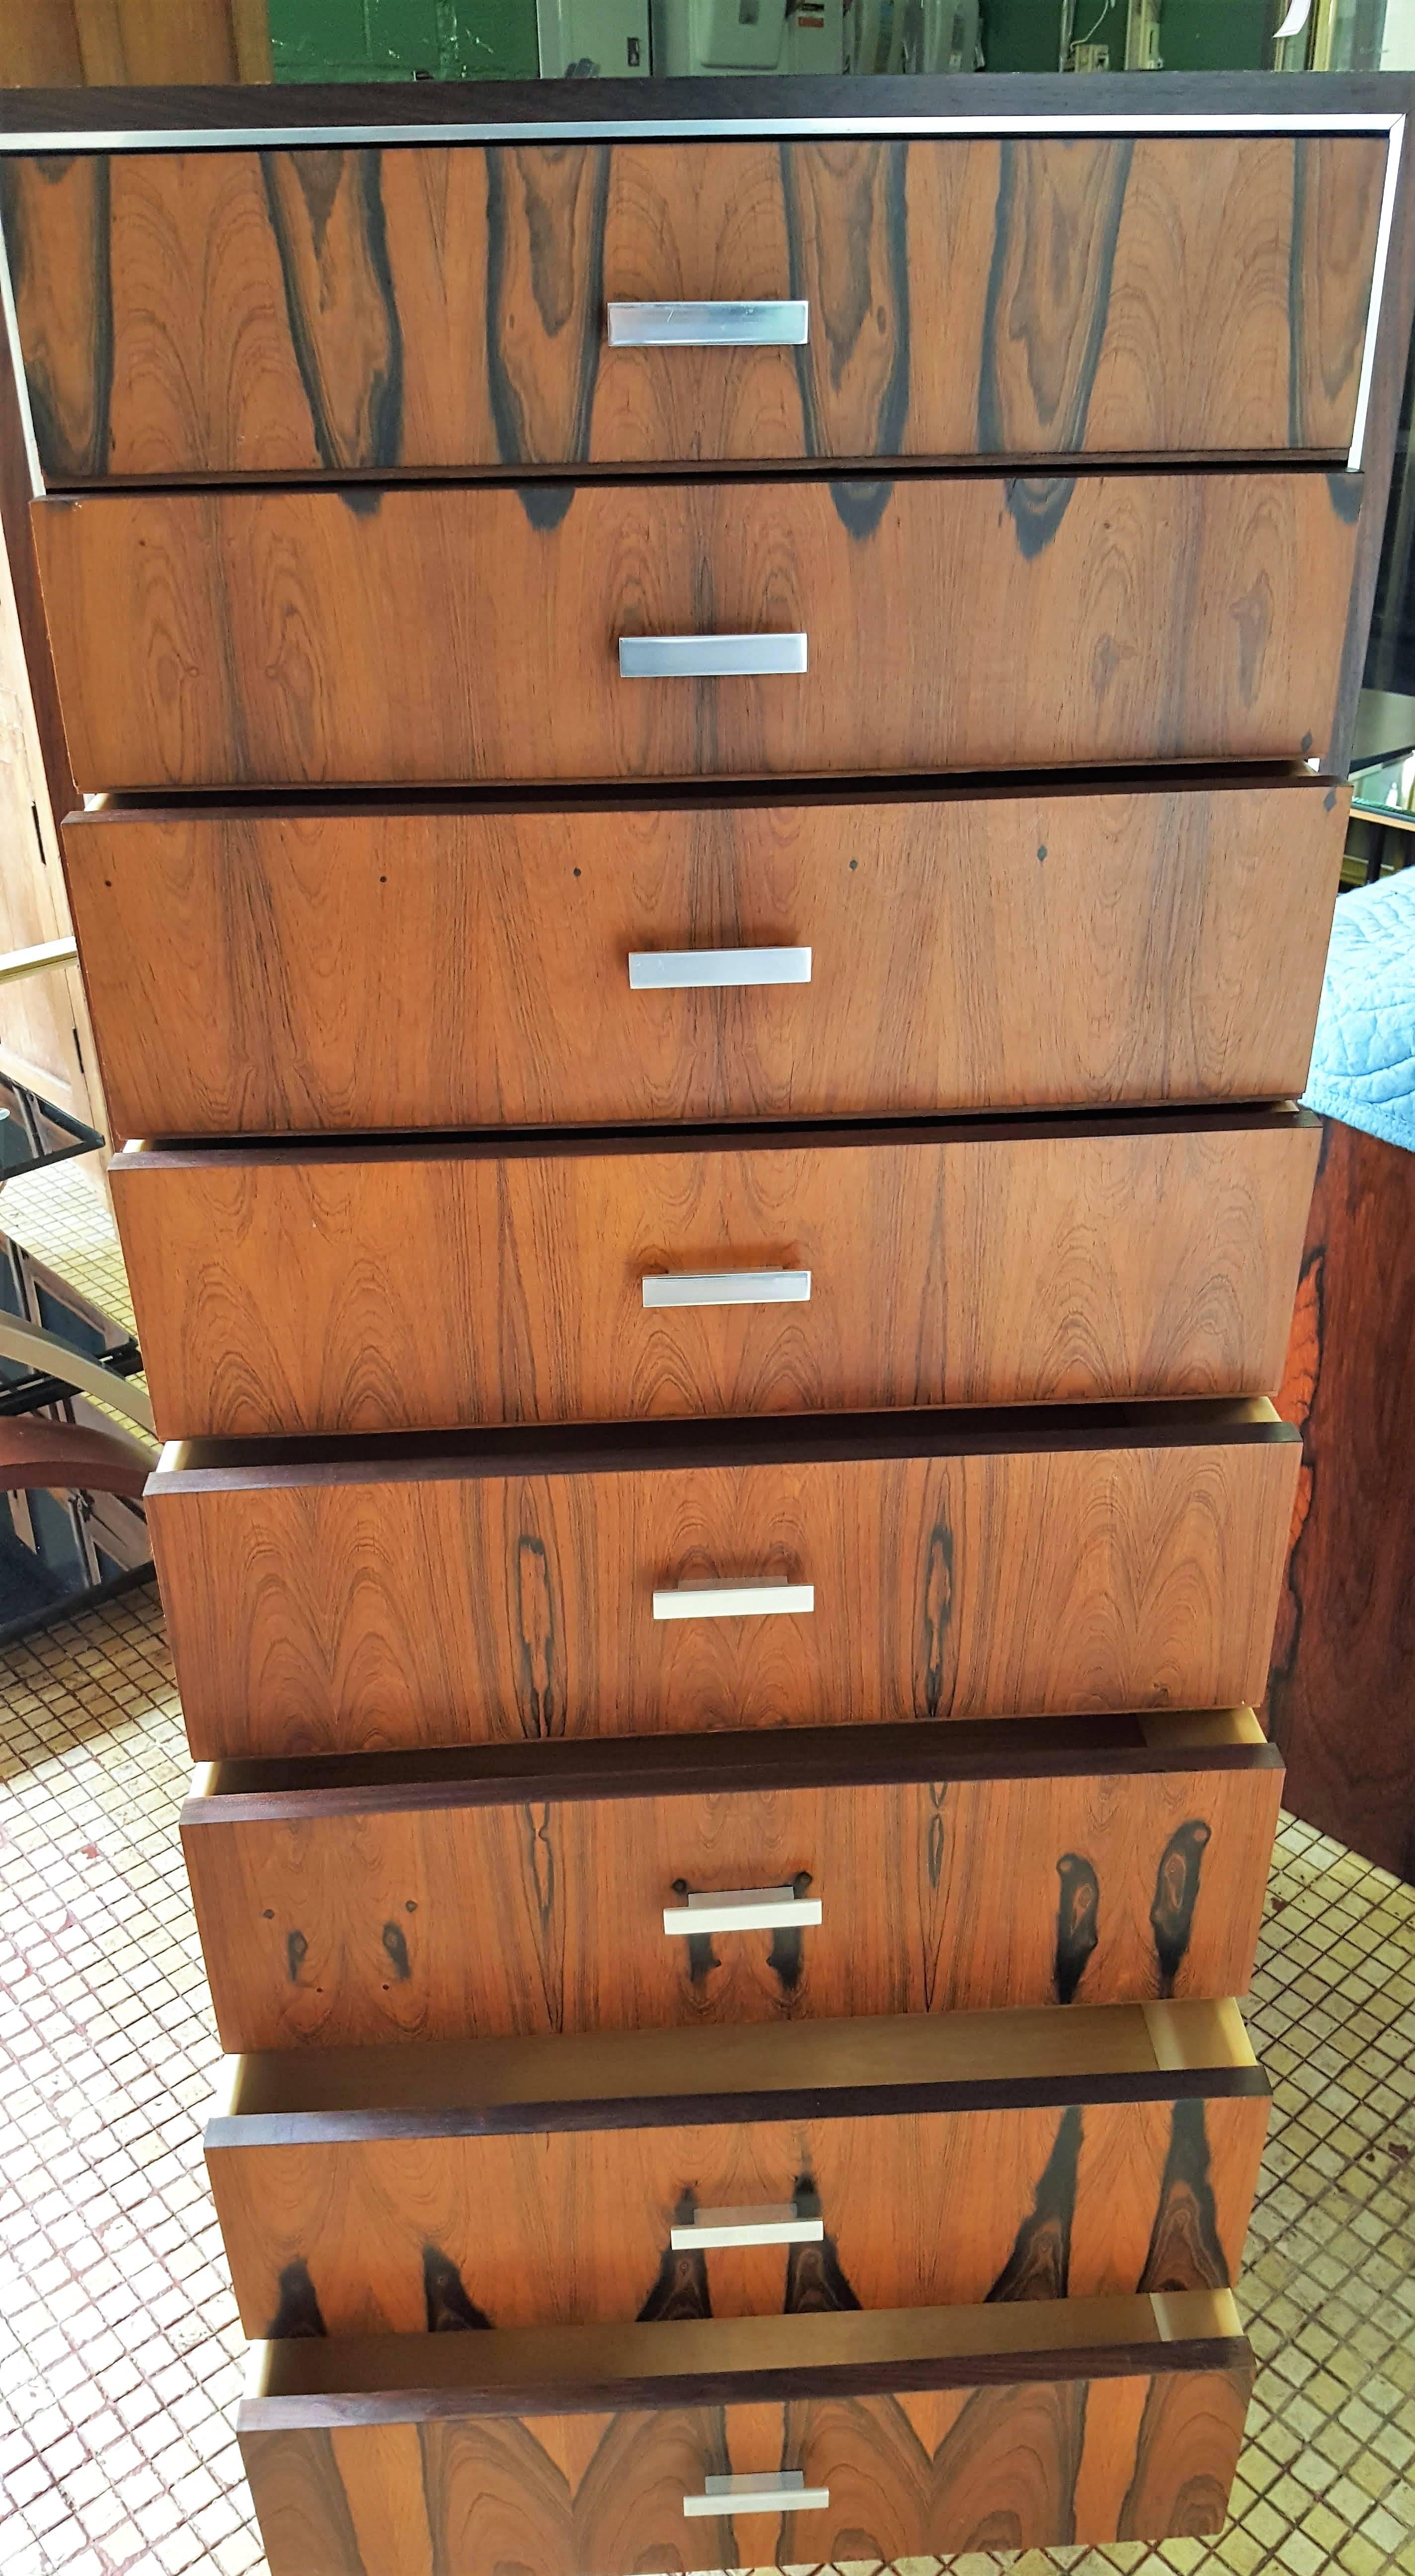 Gorgeous tall chest that is part of a collection sold separately. The rosewood pattern is spectacularly connected at all heights and sides of this dramatic piece. Eight drawers graced with chrome pulls are finished on the inside with pine. Lovely